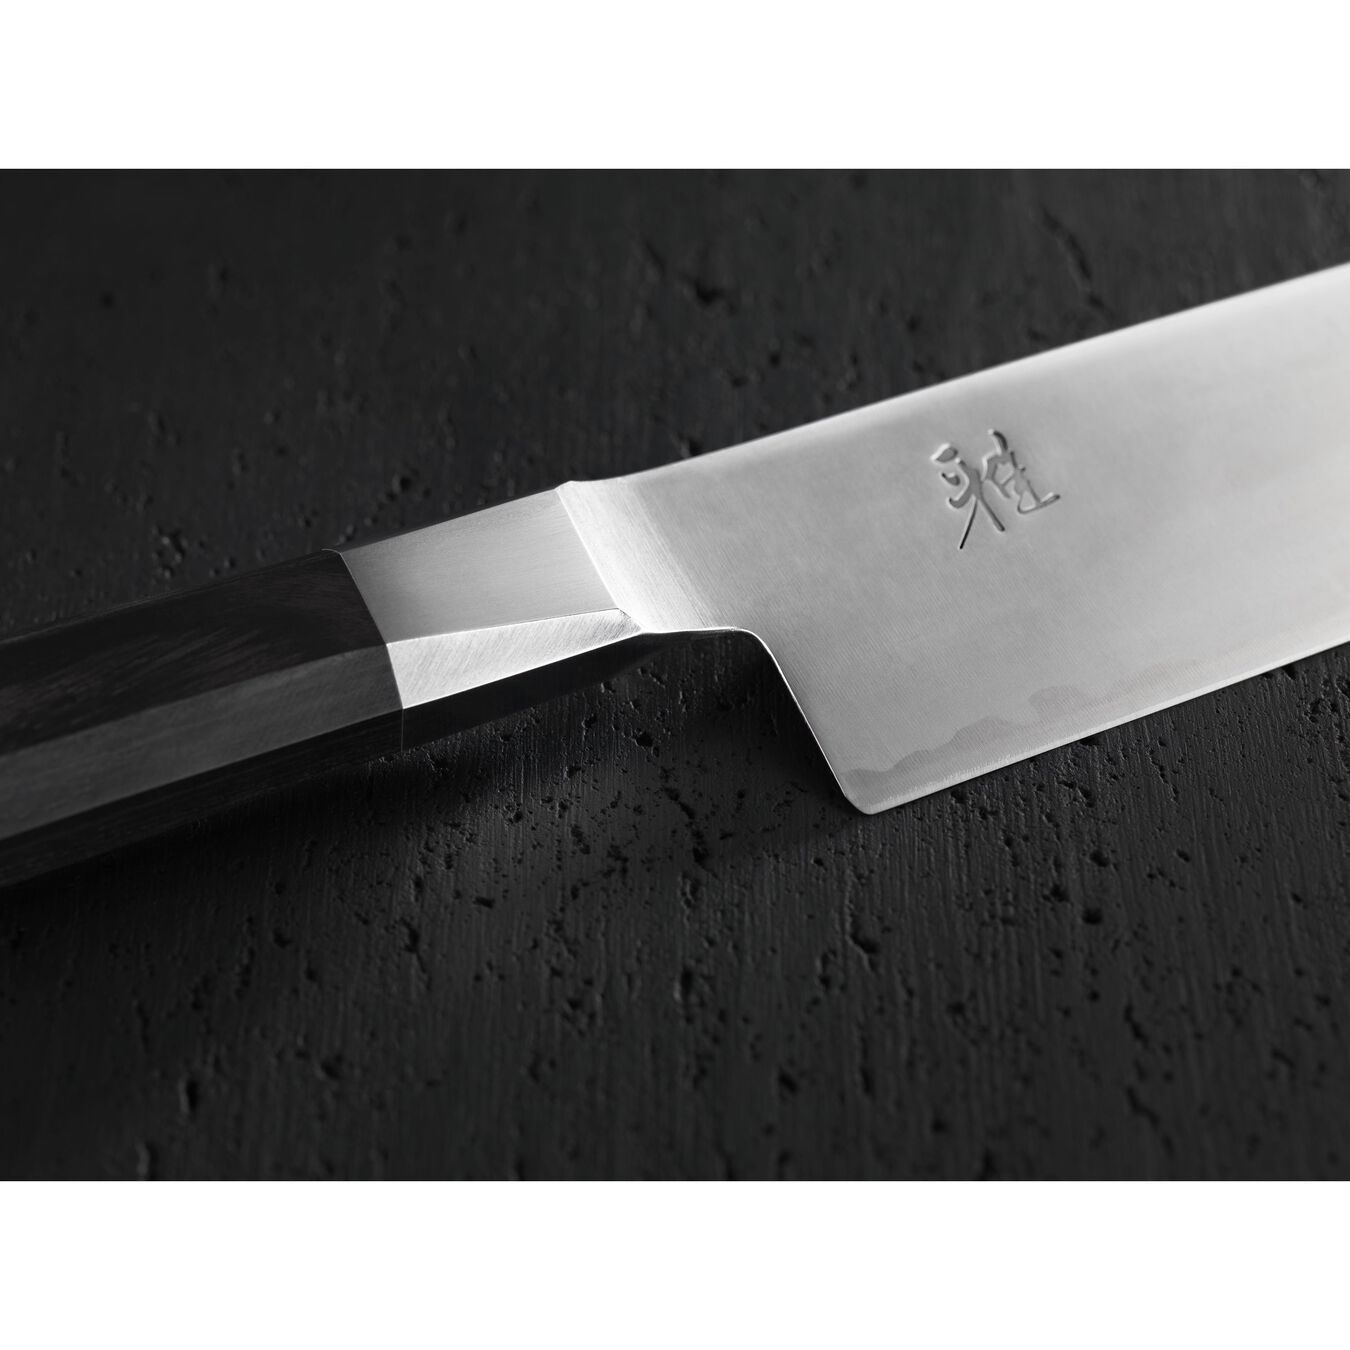 8-inch, Chef's Knife,,large 4